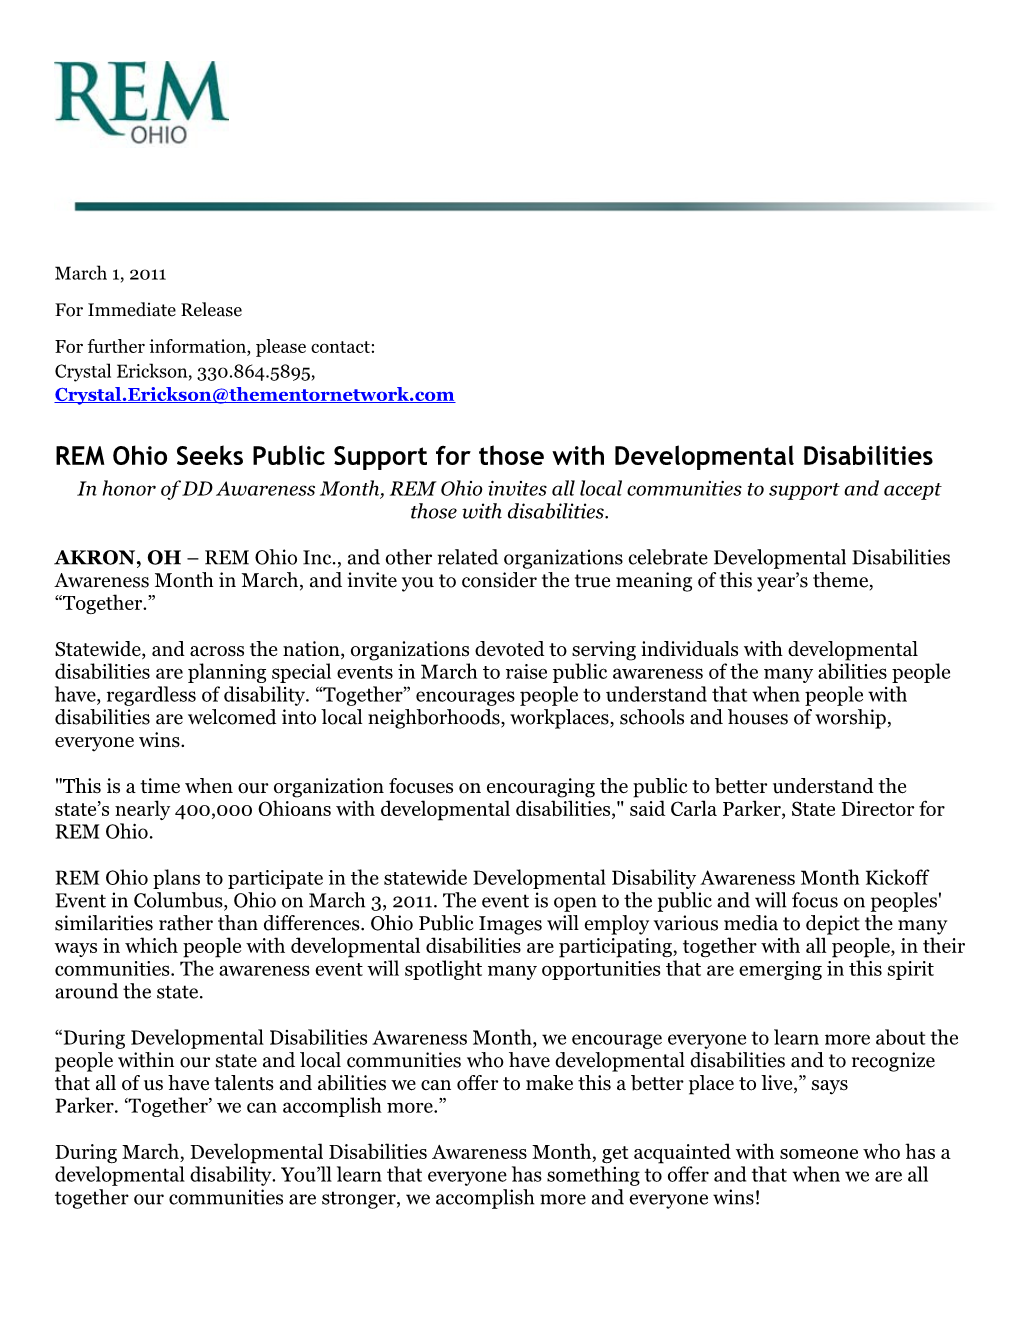 REM Ohio Seeks Public Support for Those with Developmental Disabilities